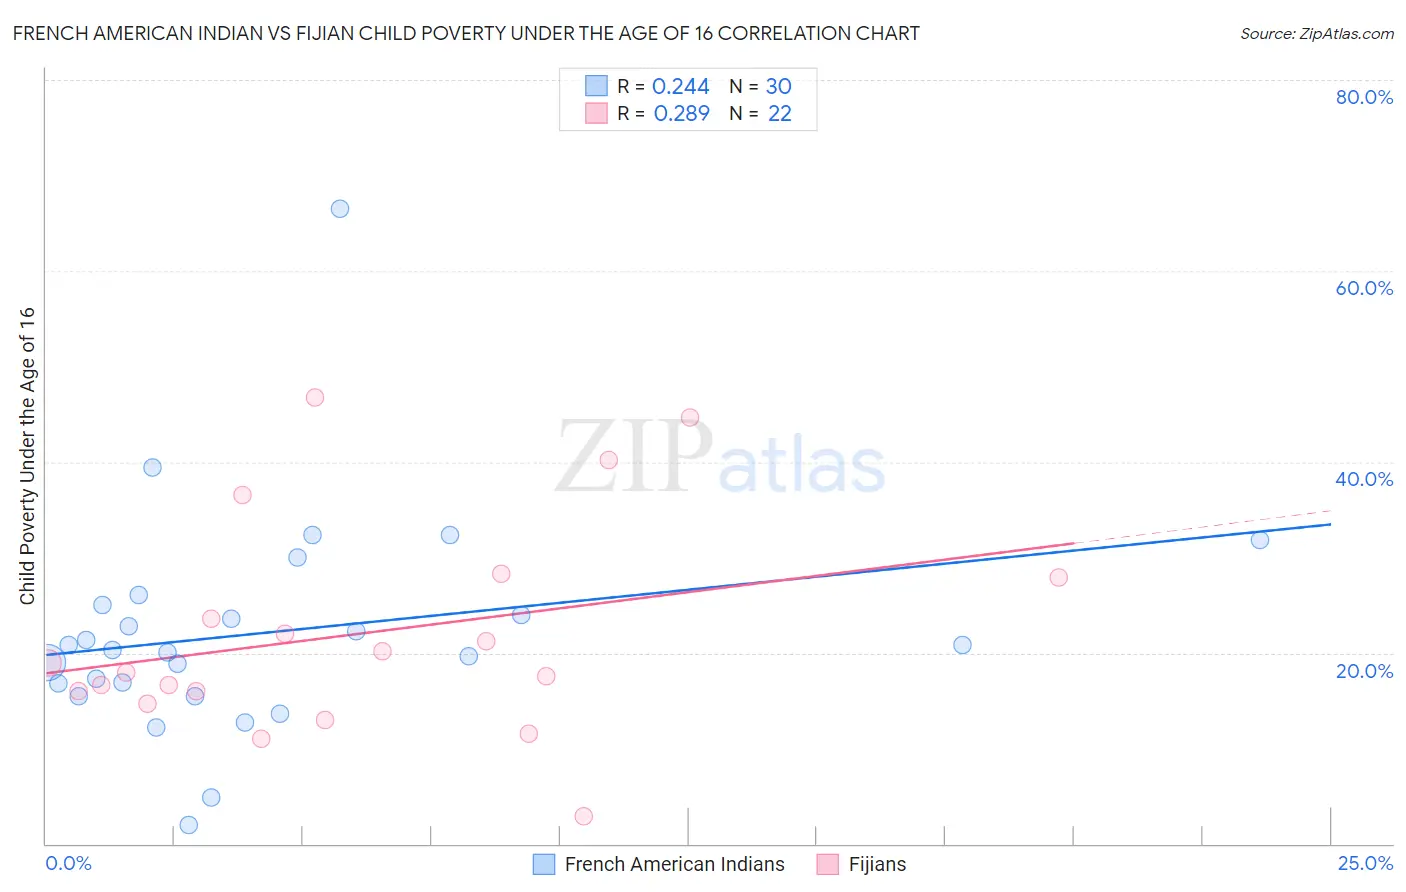 French American Indian vs Fijian Child Poverty Under the Age of 16